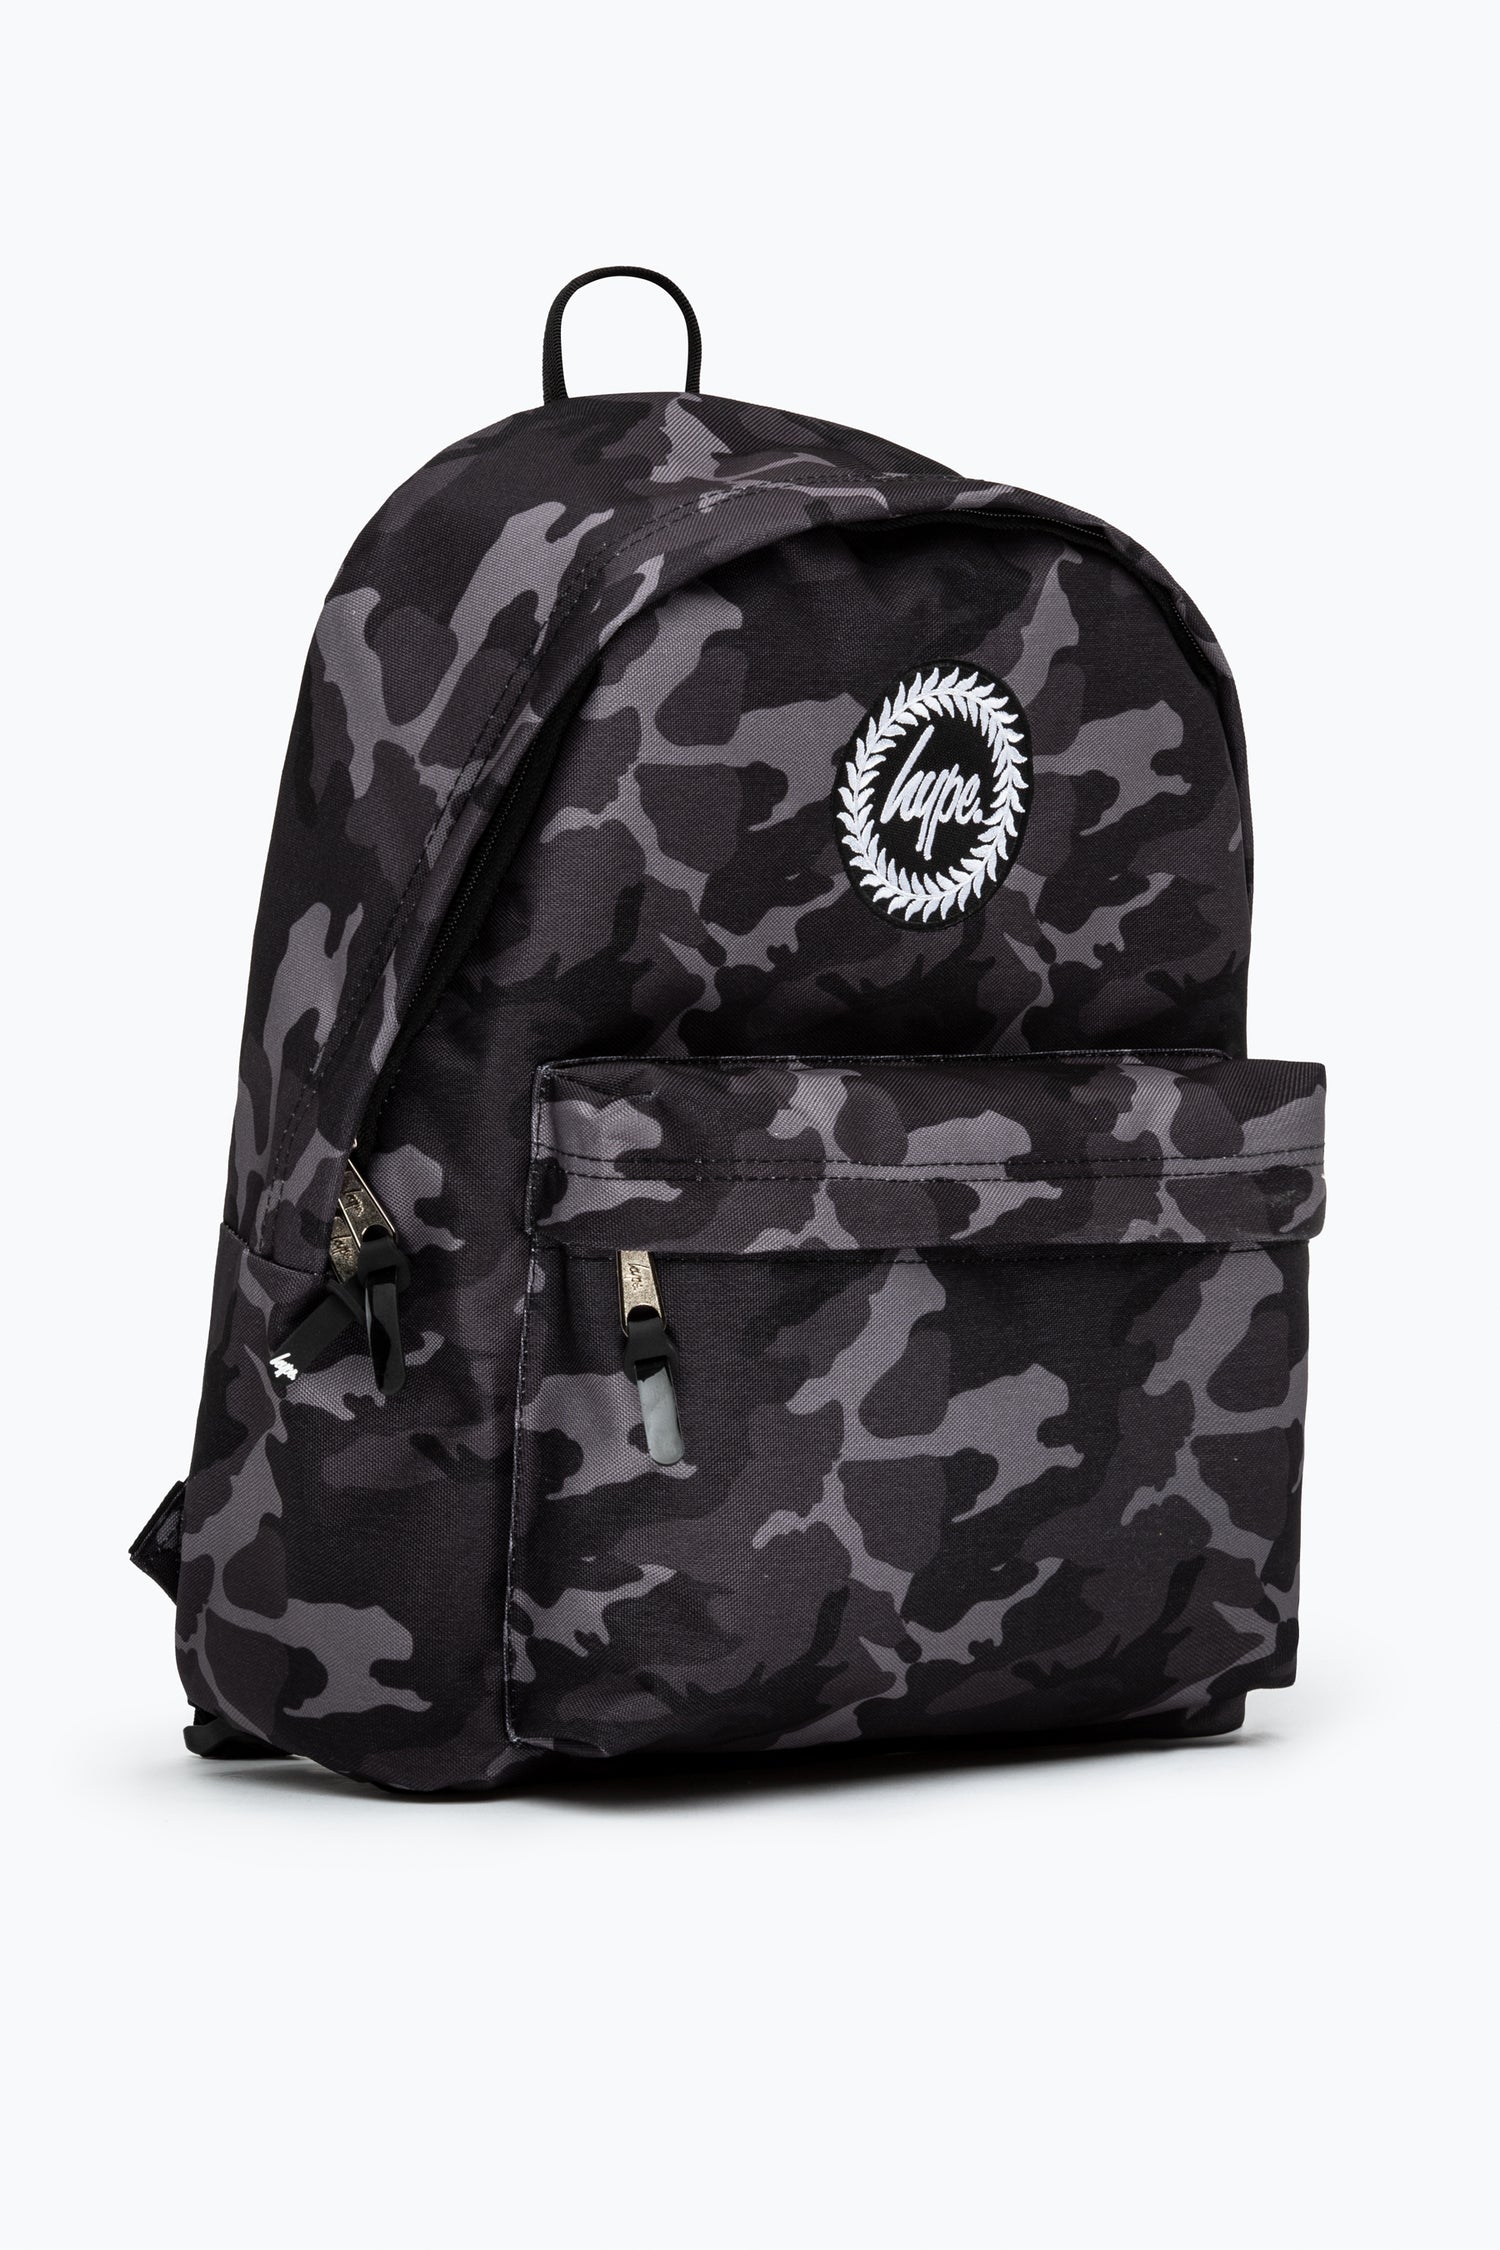 Veltri Sport Delaire Backpack (Gray Camo, Green Camo) Bags, Totes and Backpacks  Backpacks at Chagrin Saddlery Main